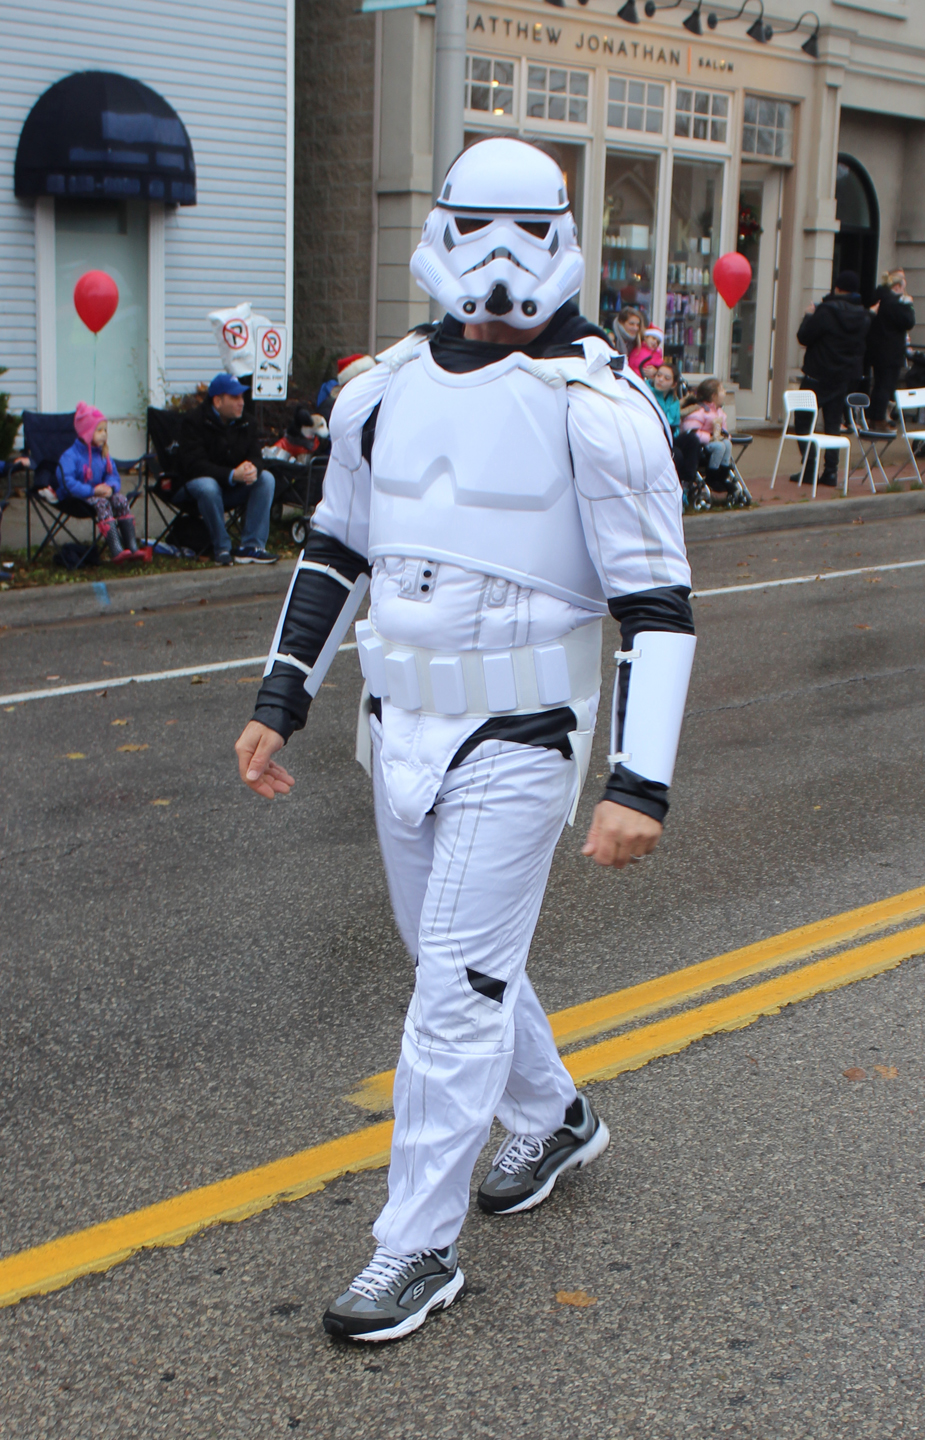 A Local 793 member dressed as a Stormtrooper from Star Wars at the Santa Claus Parade.